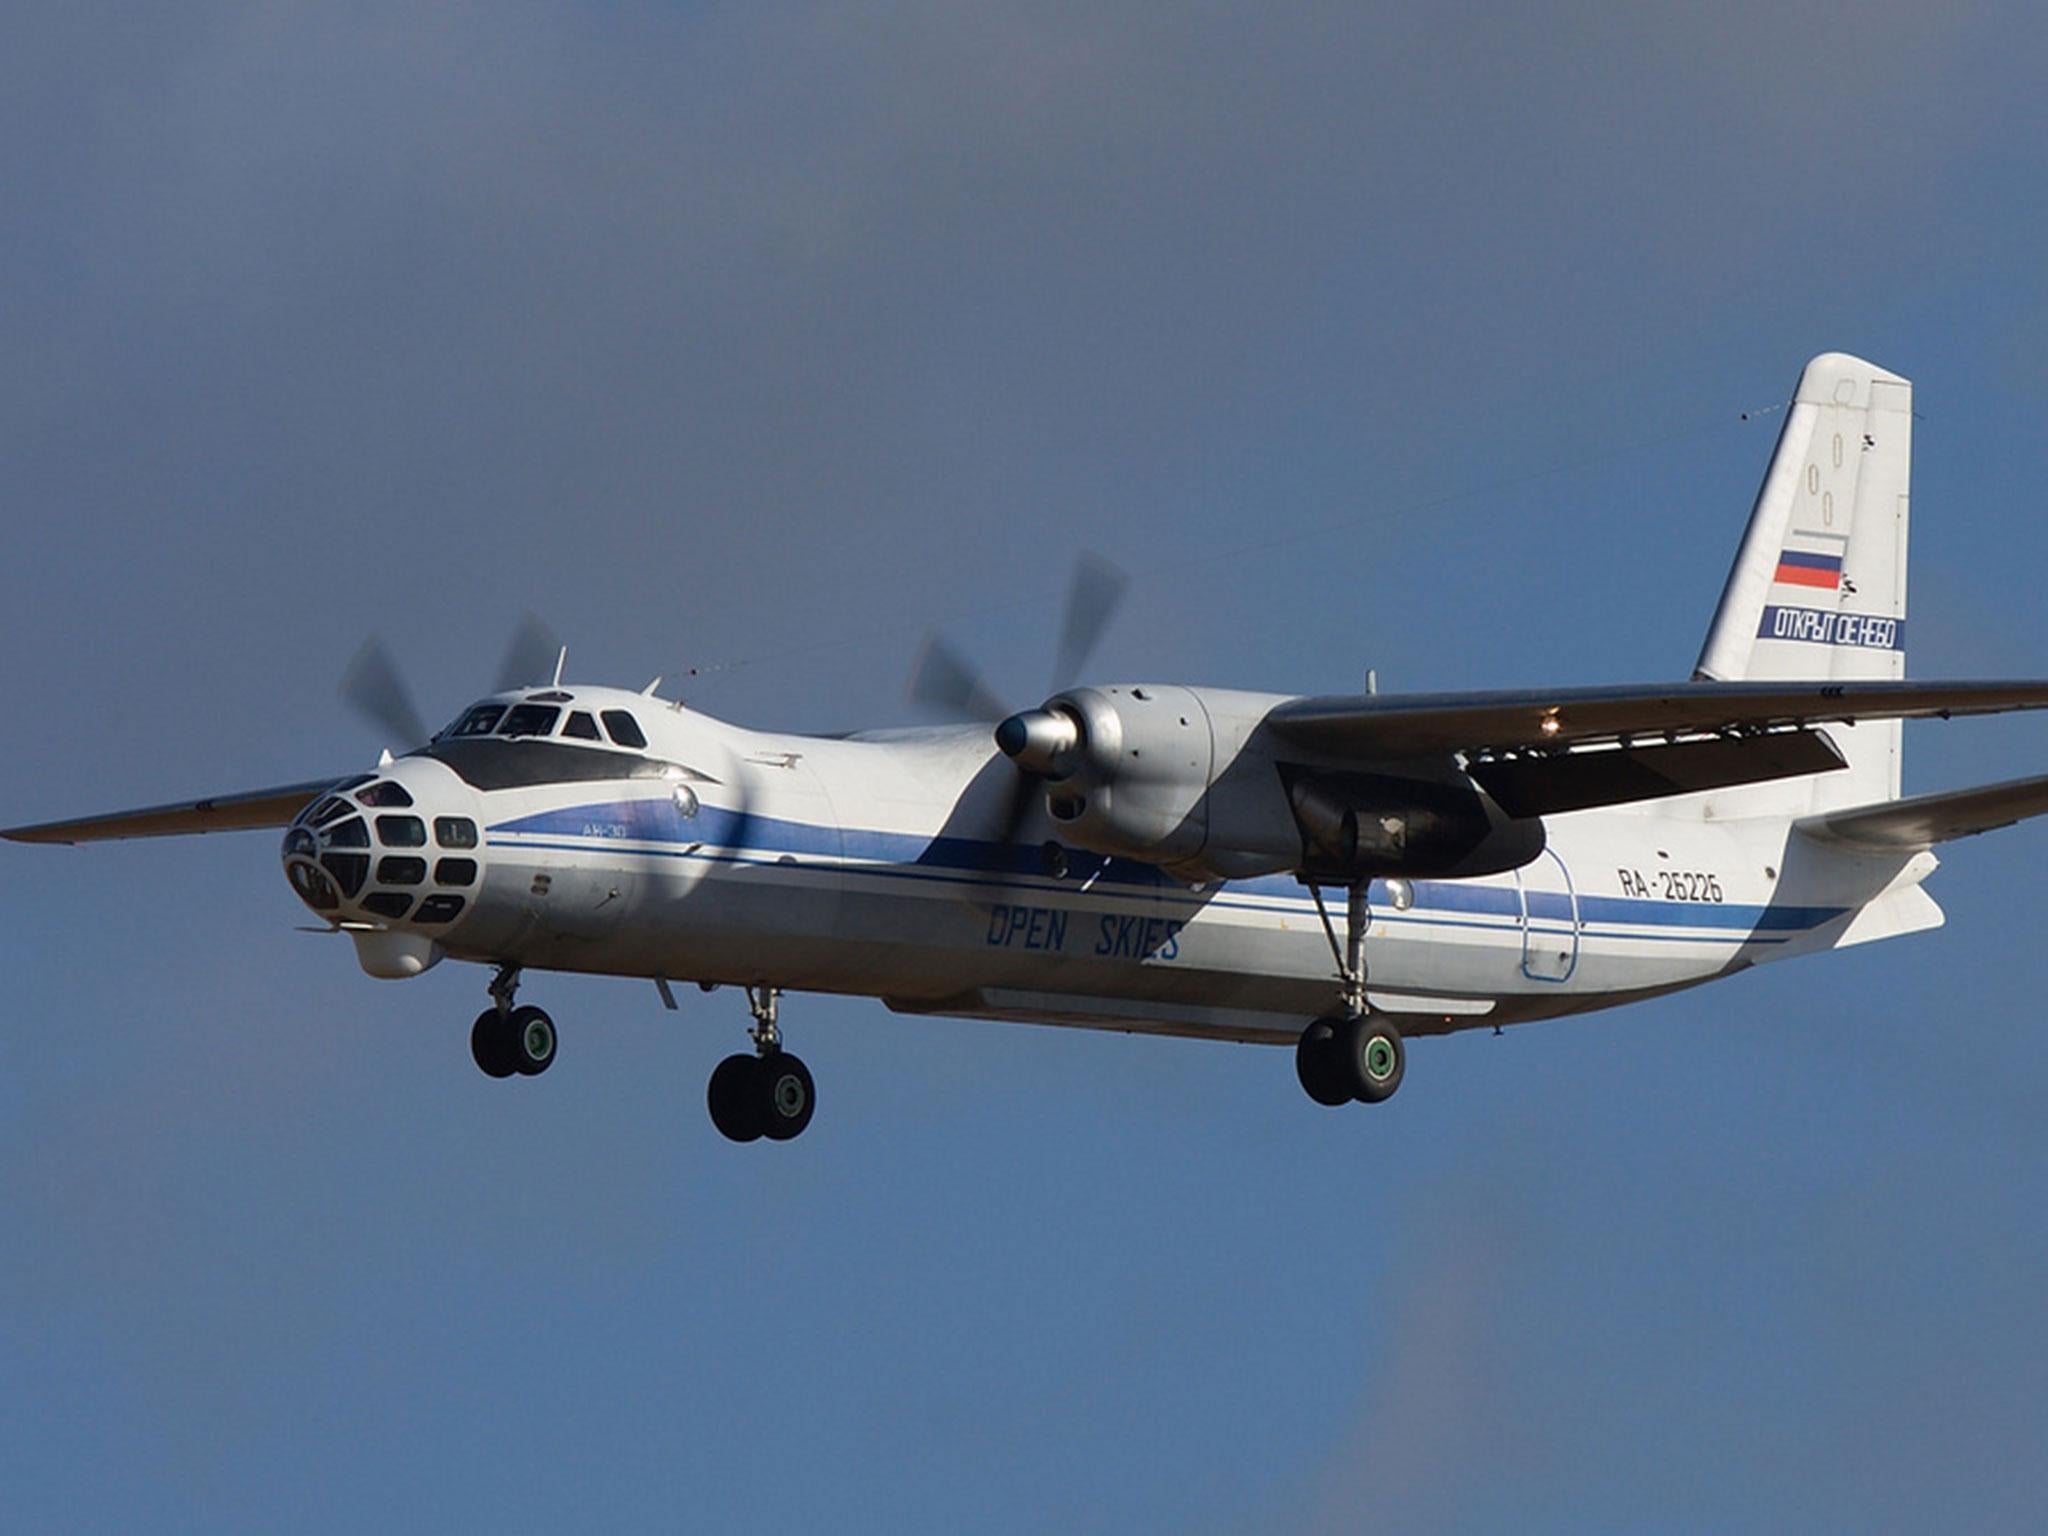 RAF personnel will be on board the Russian Antonov An-30B as it conducts its flights